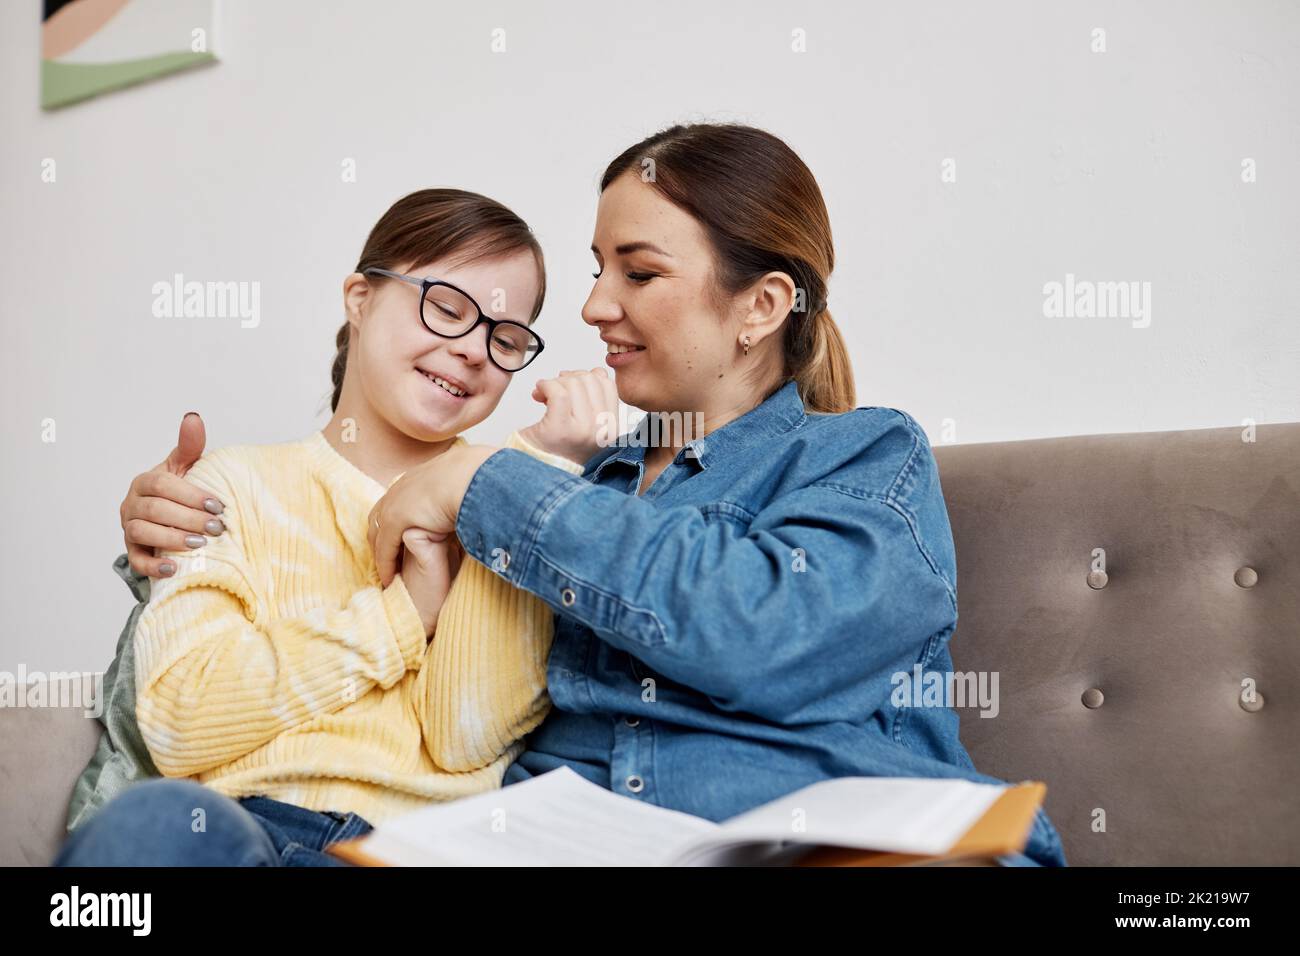 Portrait of happy teenage girl with Down syndrome cuddling with mother while sitting on couch at home Stock Photo